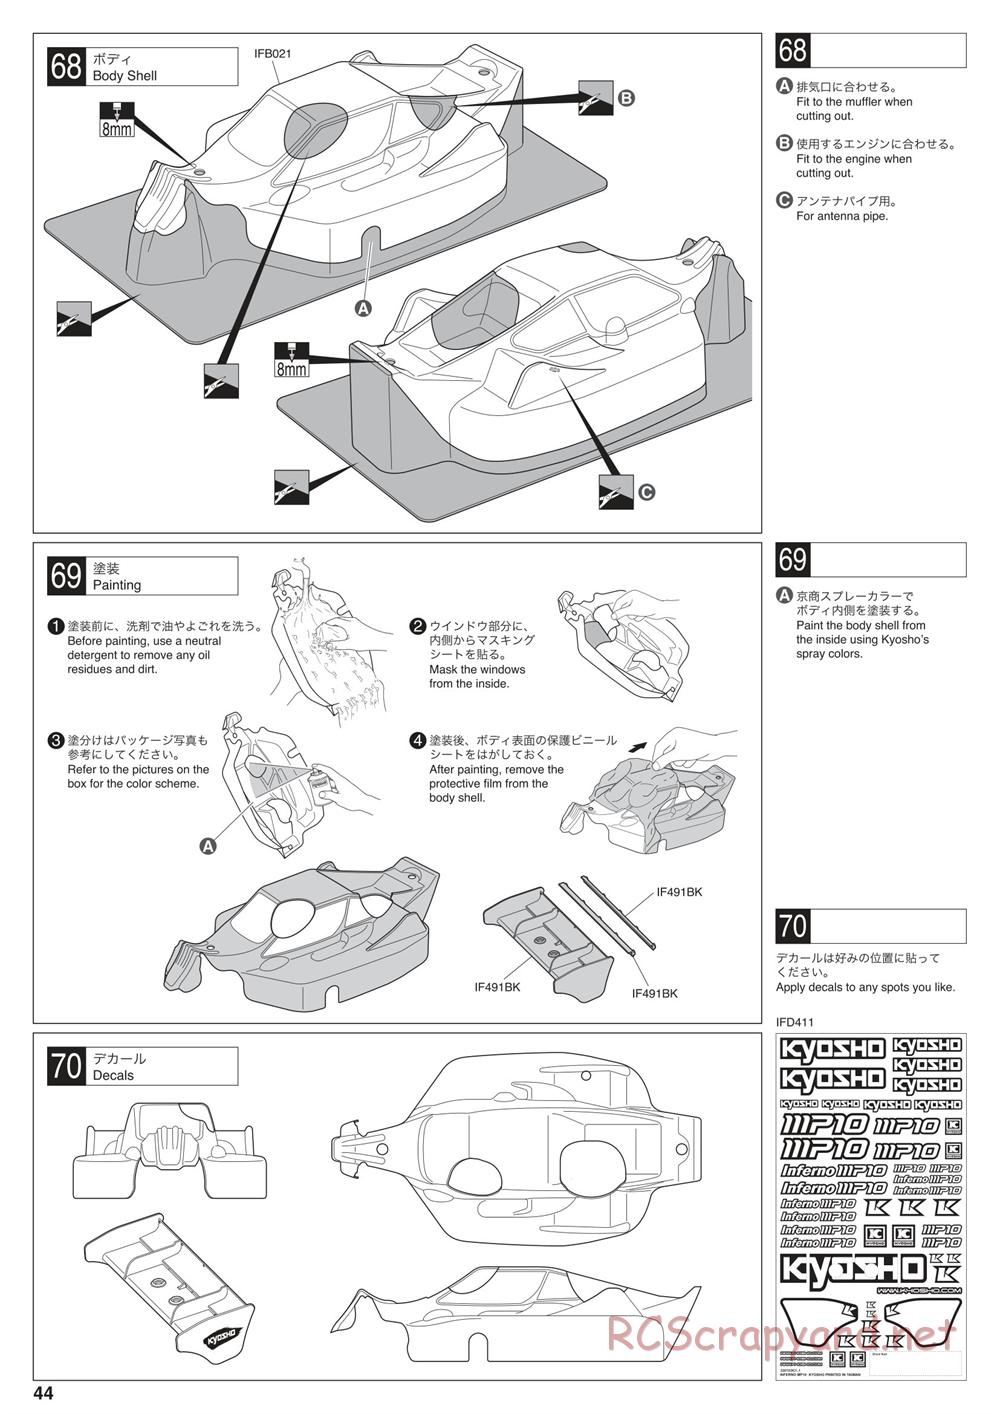 Kyosho - Inferno MP10 - Manual - Page 44